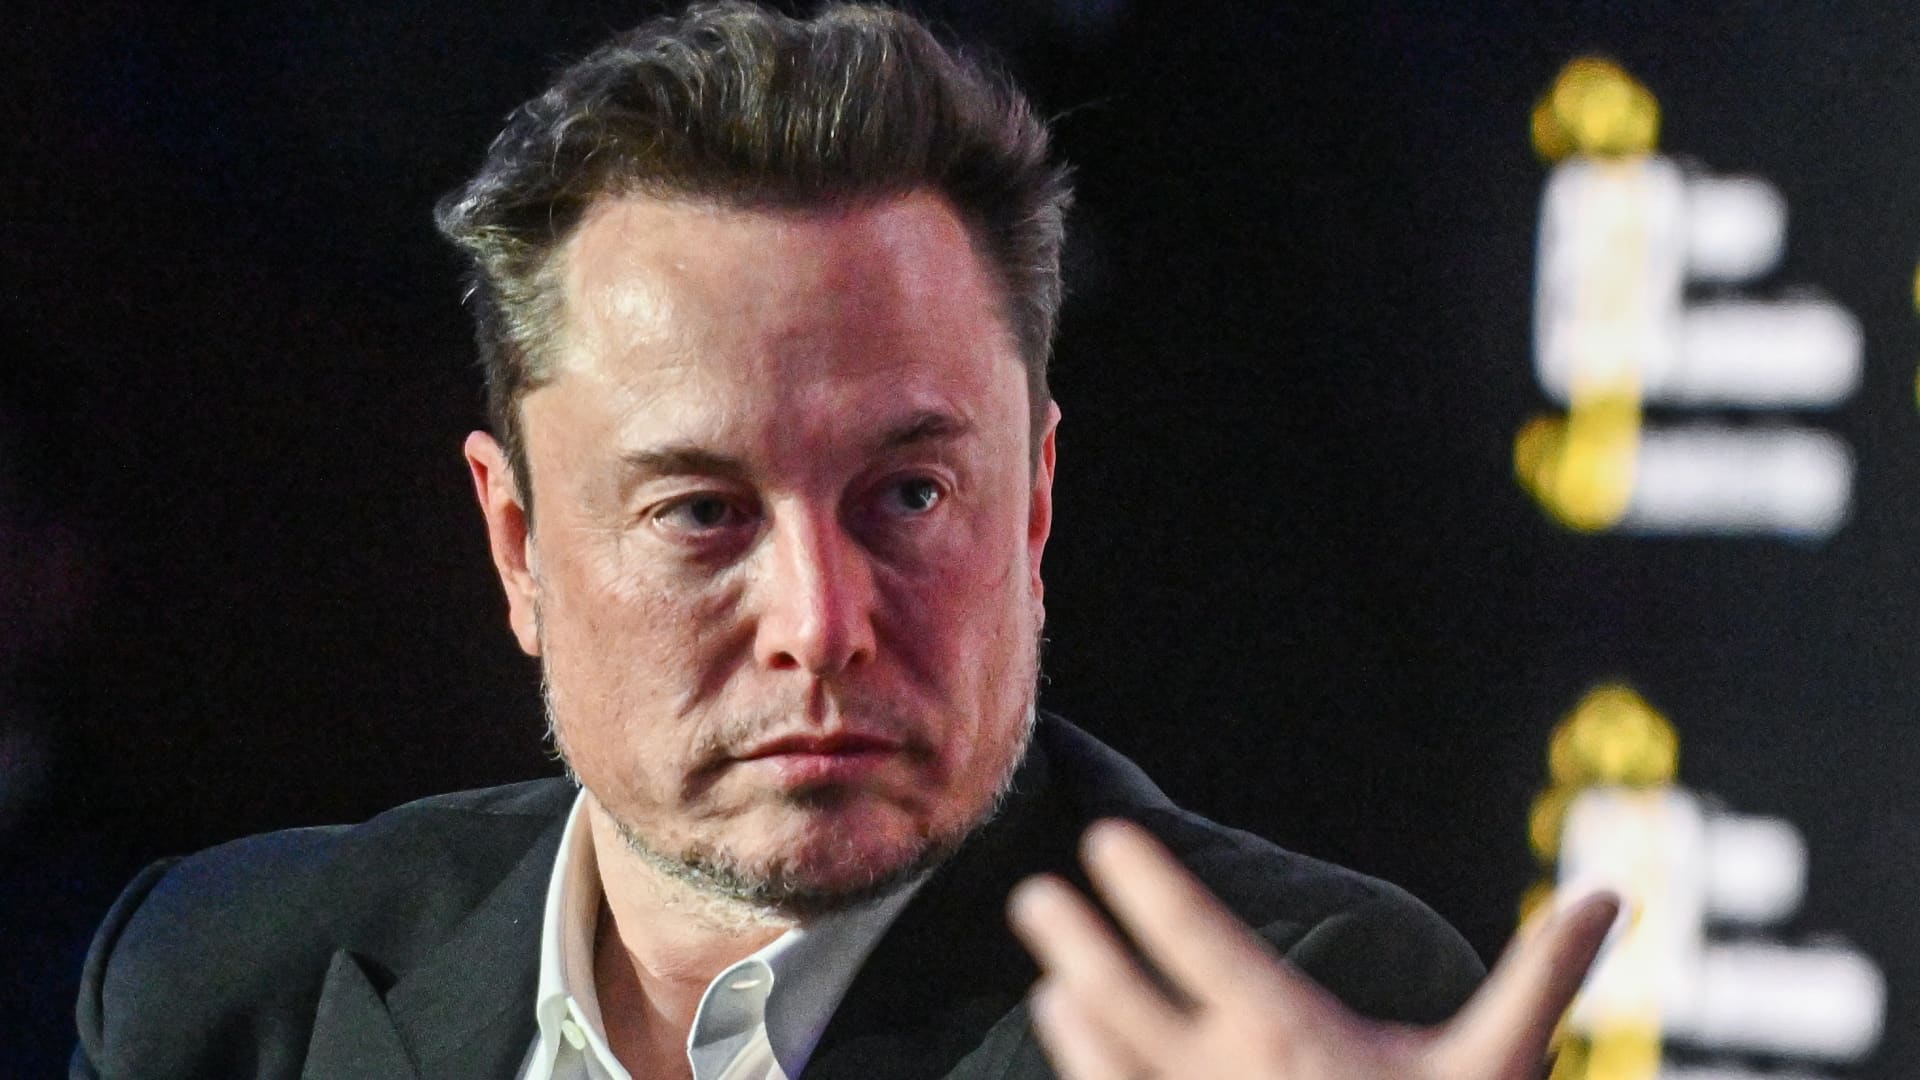 Elon Musk’s X loses lawsuit against Bright Data over data scraping